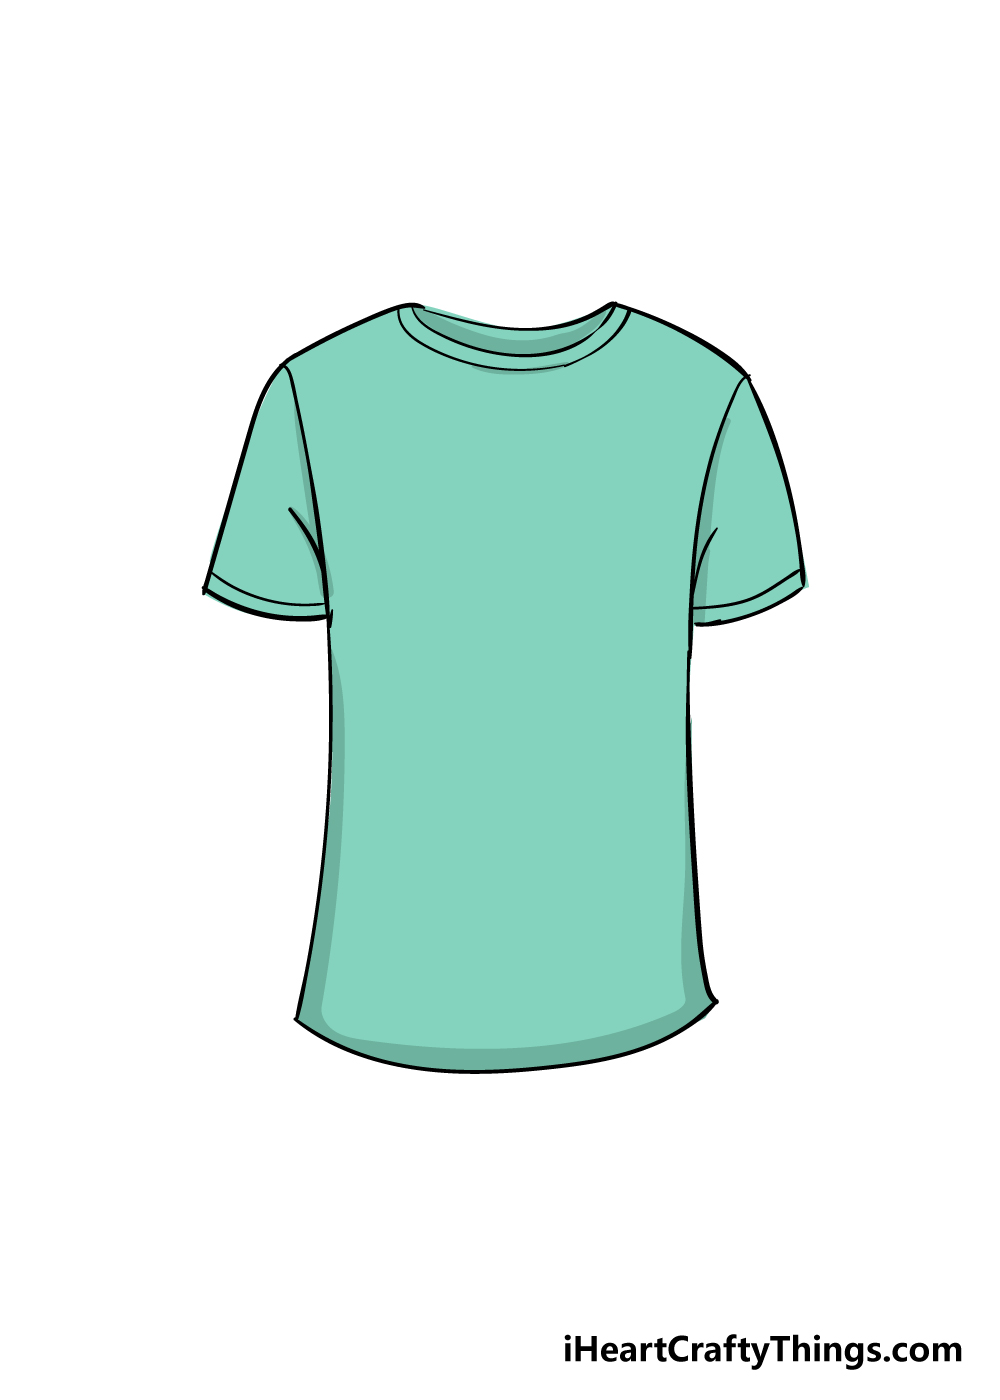 Shirt Drawing - How To Draw A Shirt Step By Step